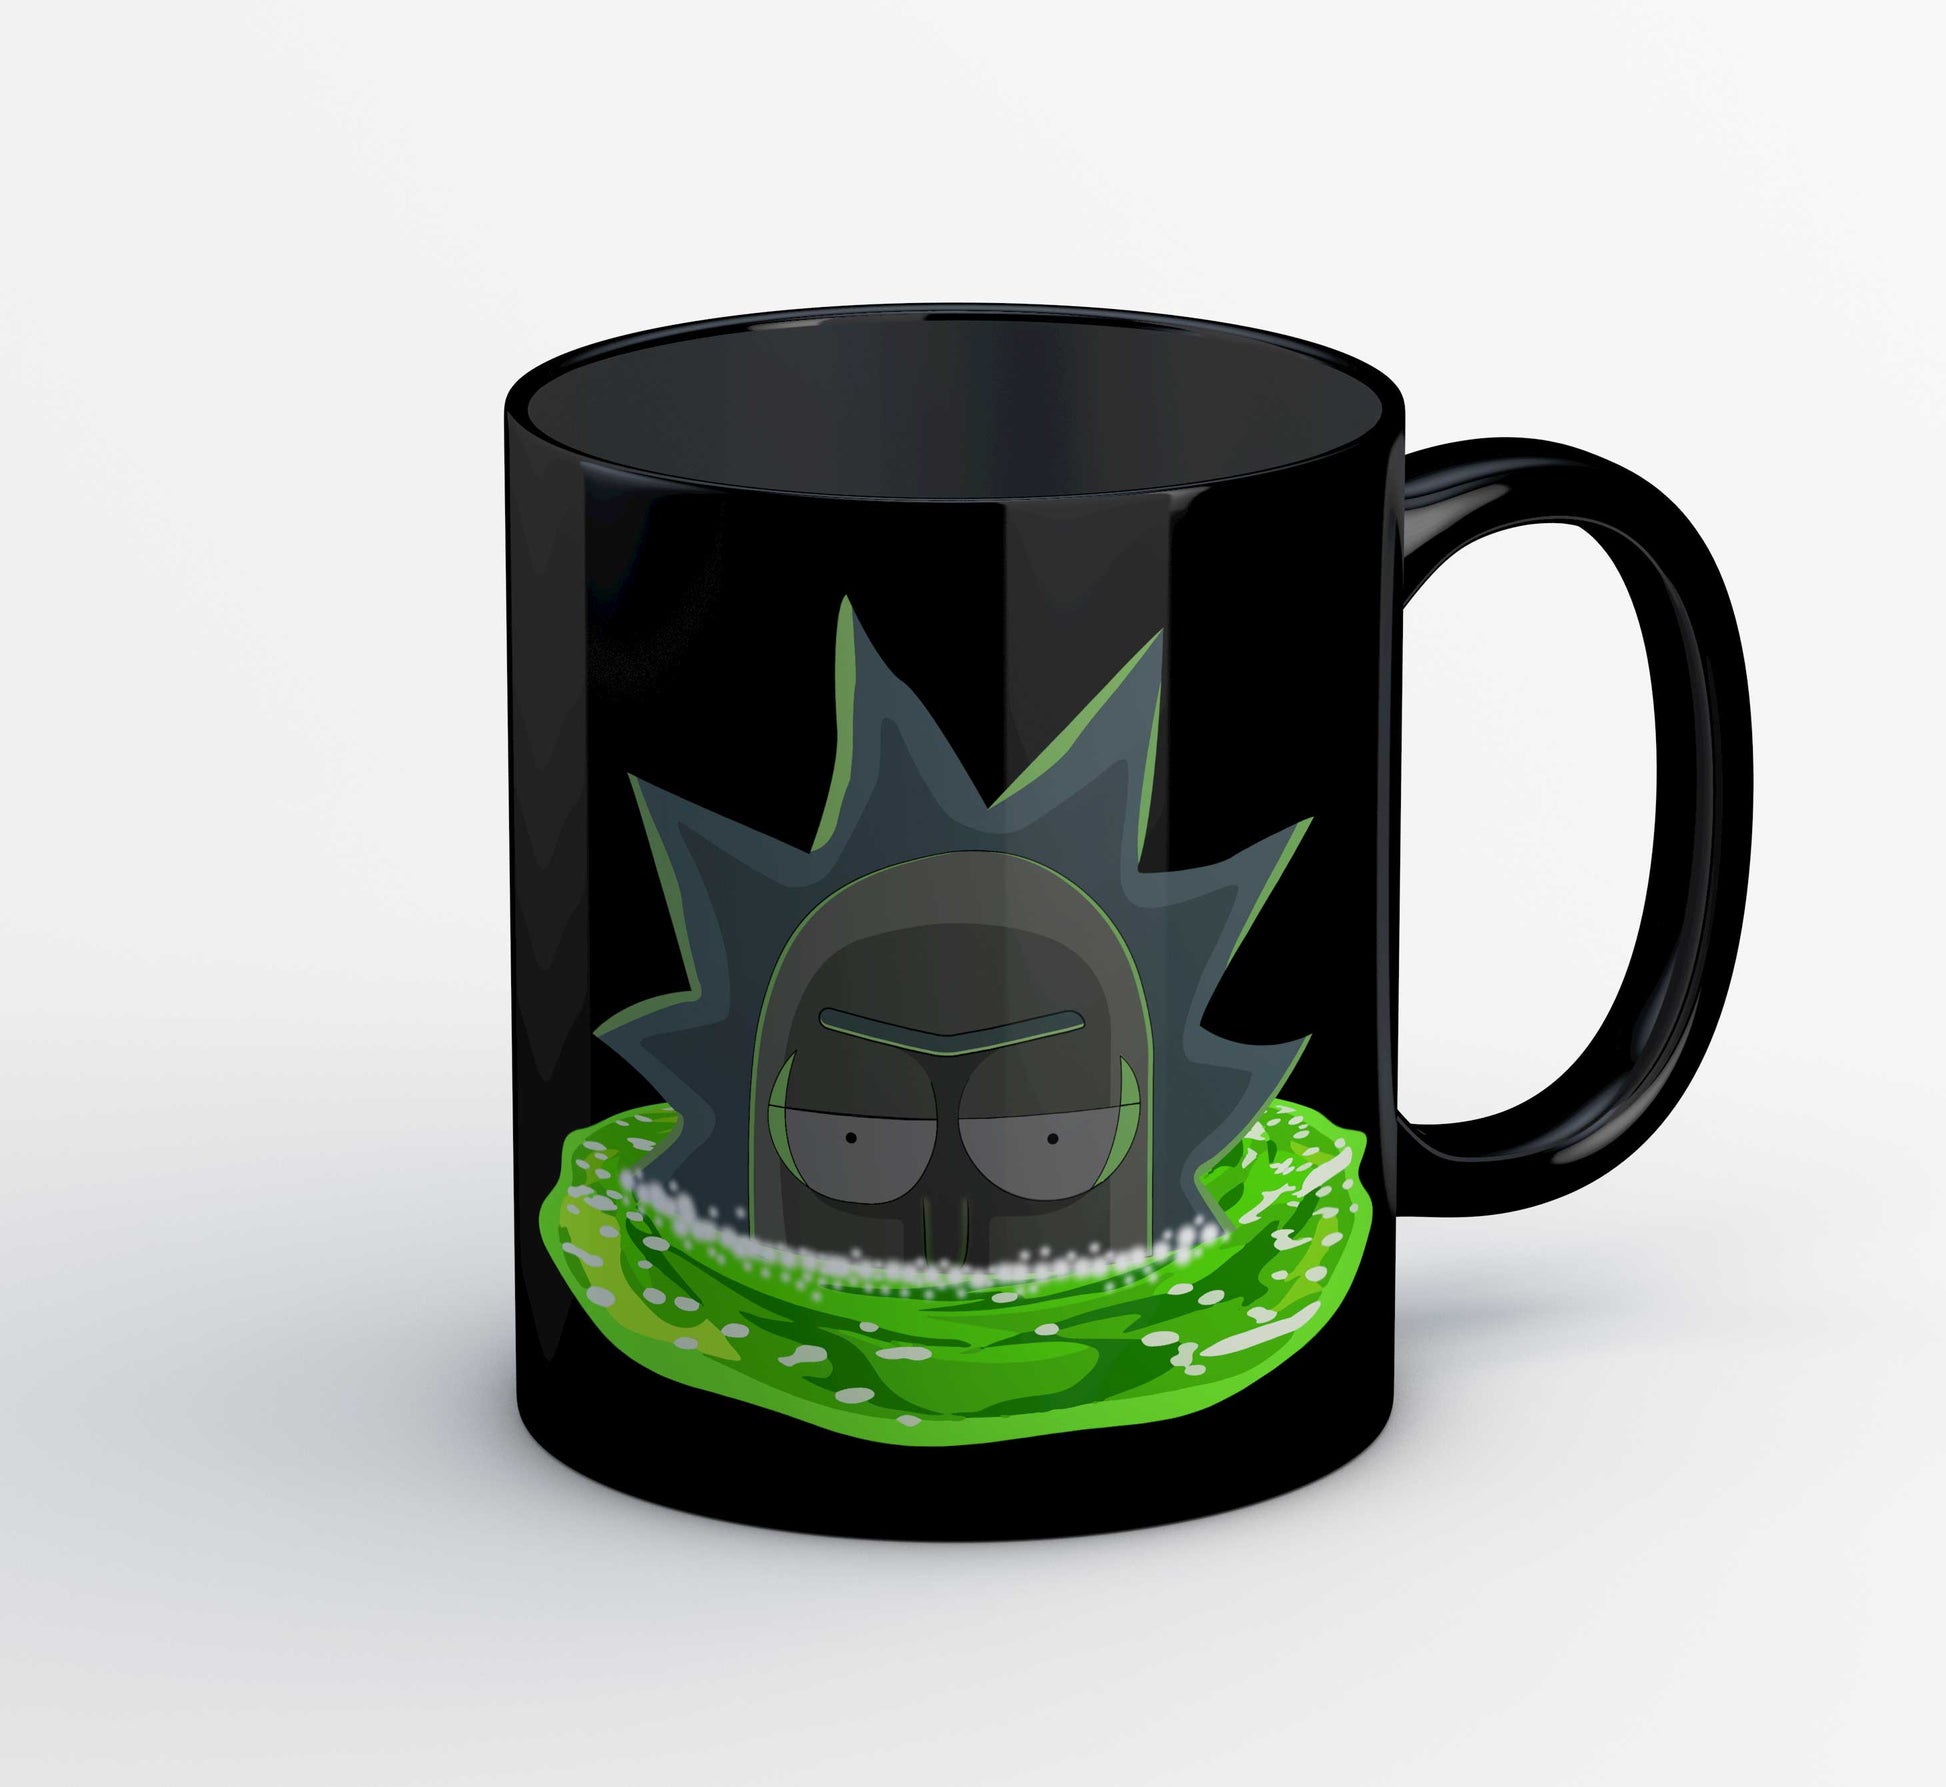 rick and morty teleportation mug coffee ceramic buy online india the banyan tee tbt men women girls boys unisex  rick and morty online summer beth mr meeseeks jerry quote vector art clothing accessories merchandise